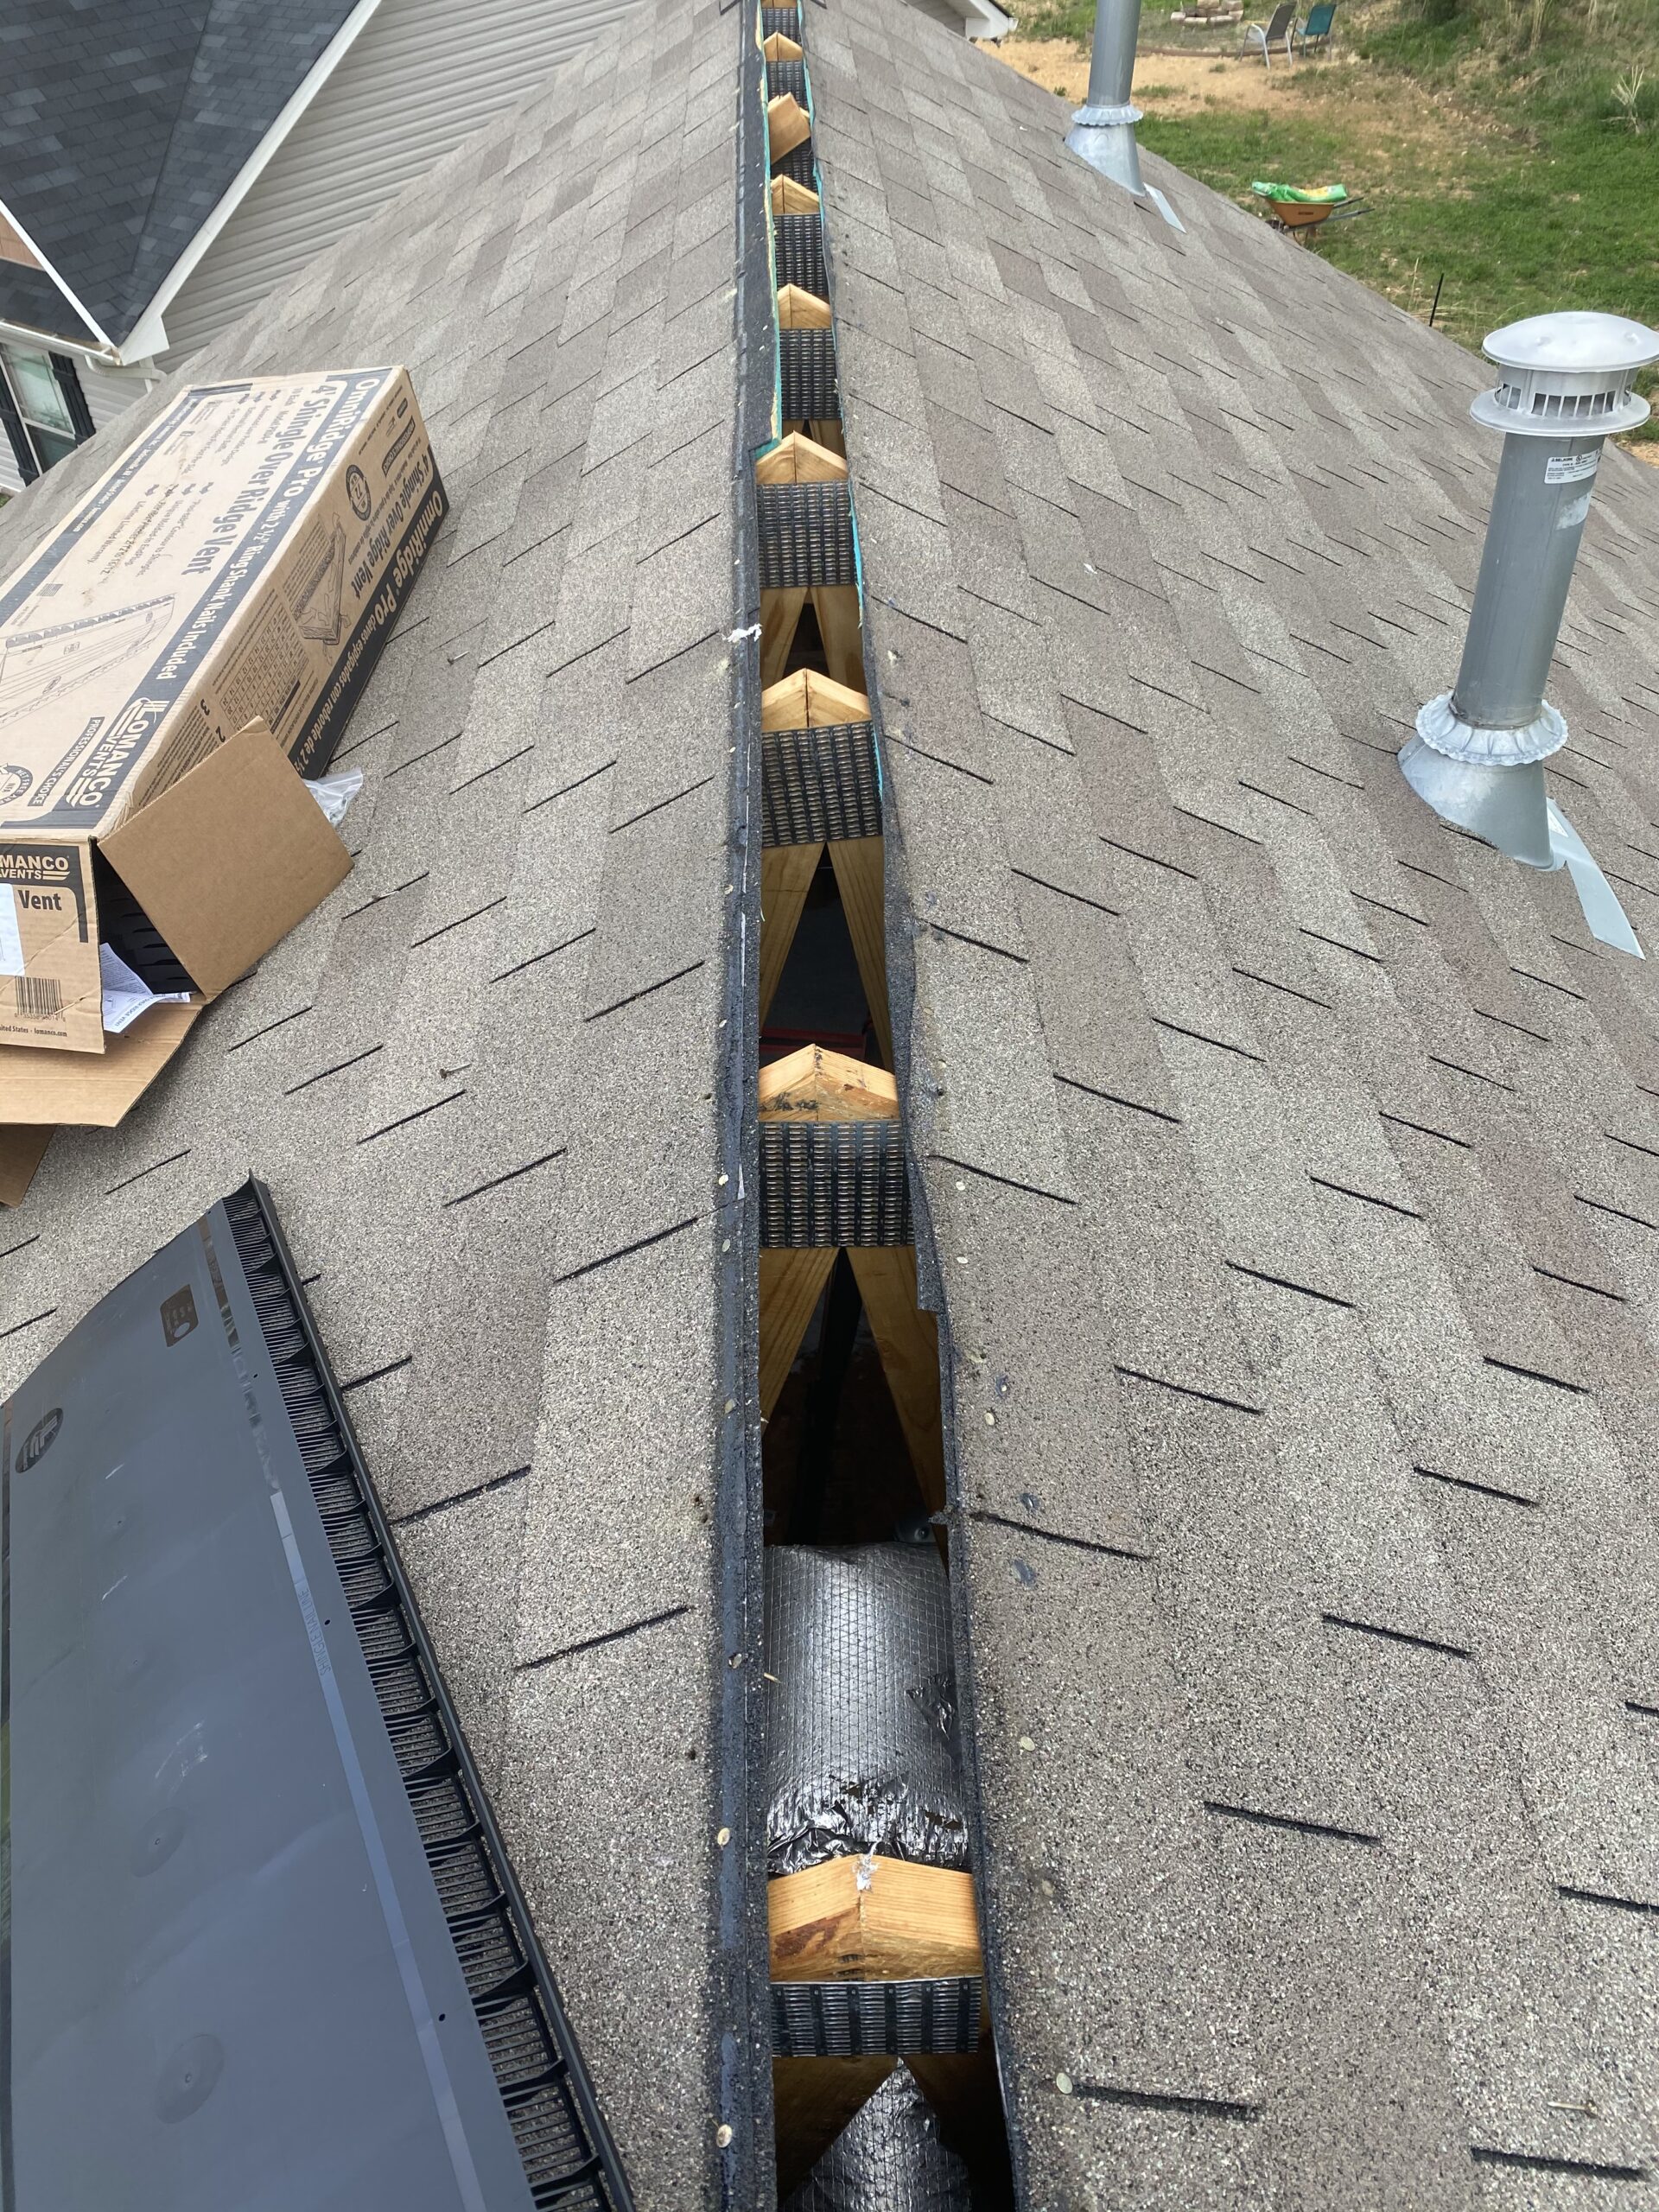 This is a picture of a ridge of the roof without a vent on it